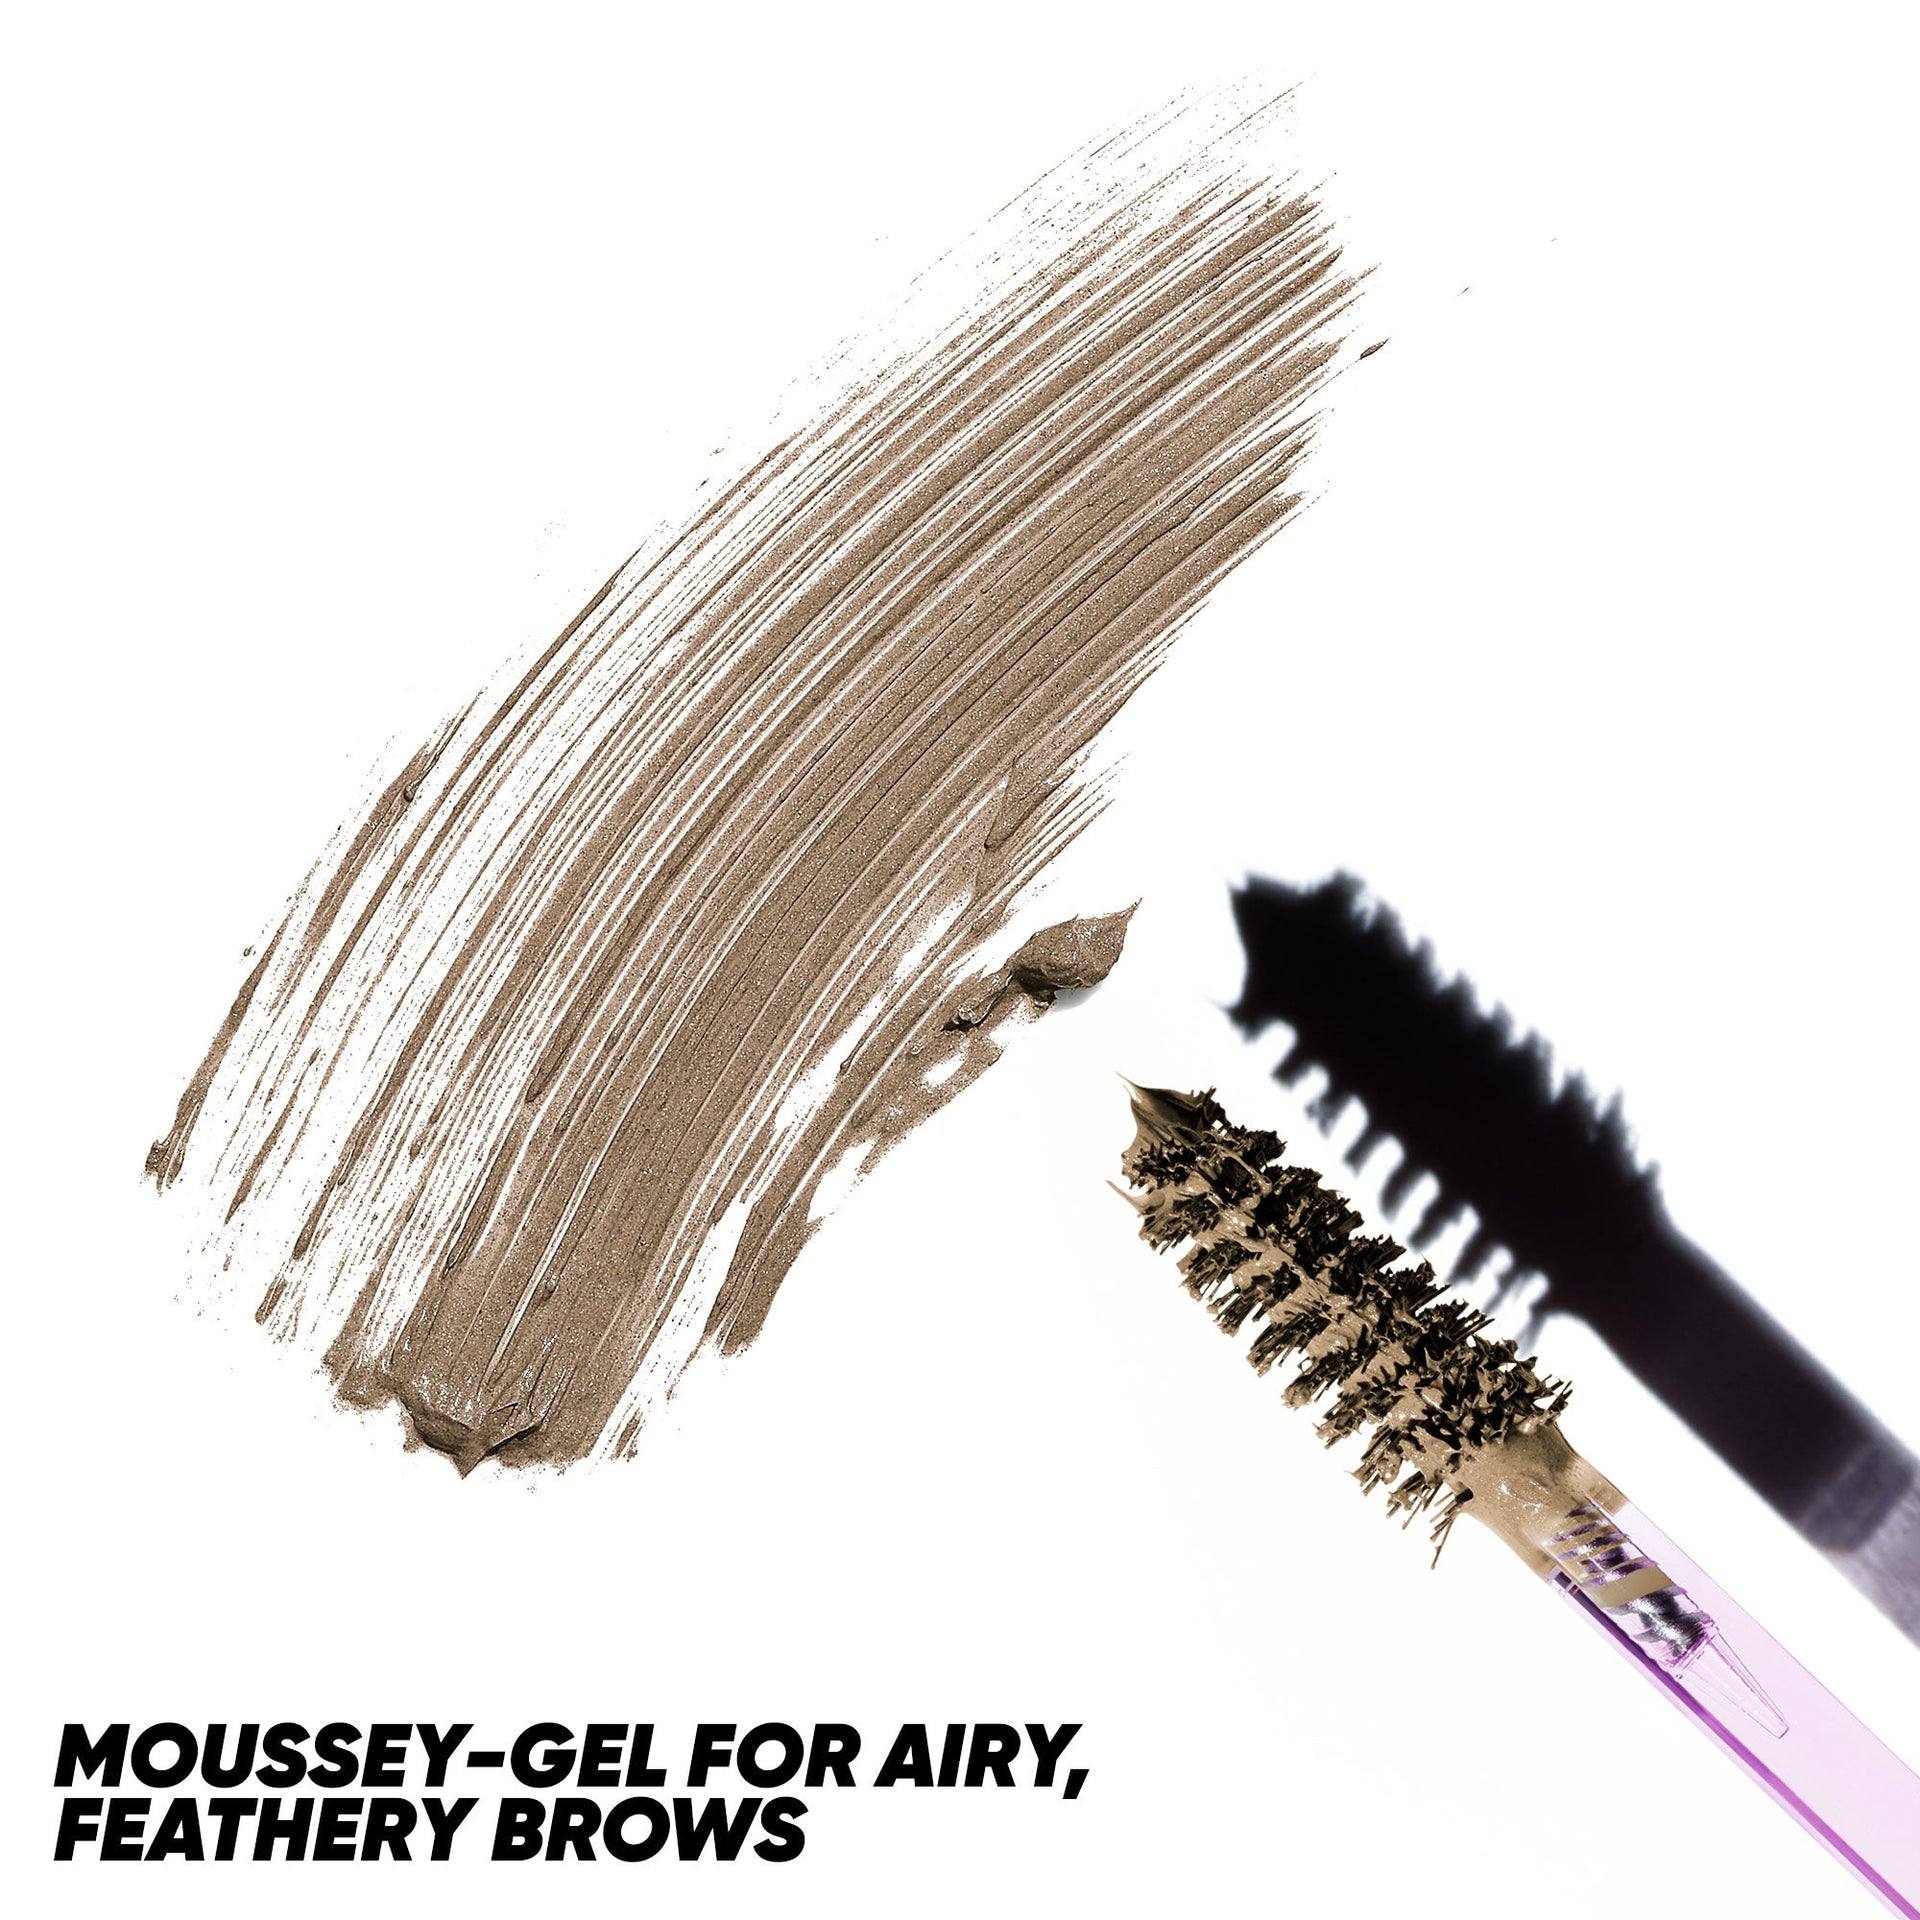 Swatch of Kosas Air Brow Tinted Moussey-Gel in shade 'Taupe,' providing airy and feathery brows